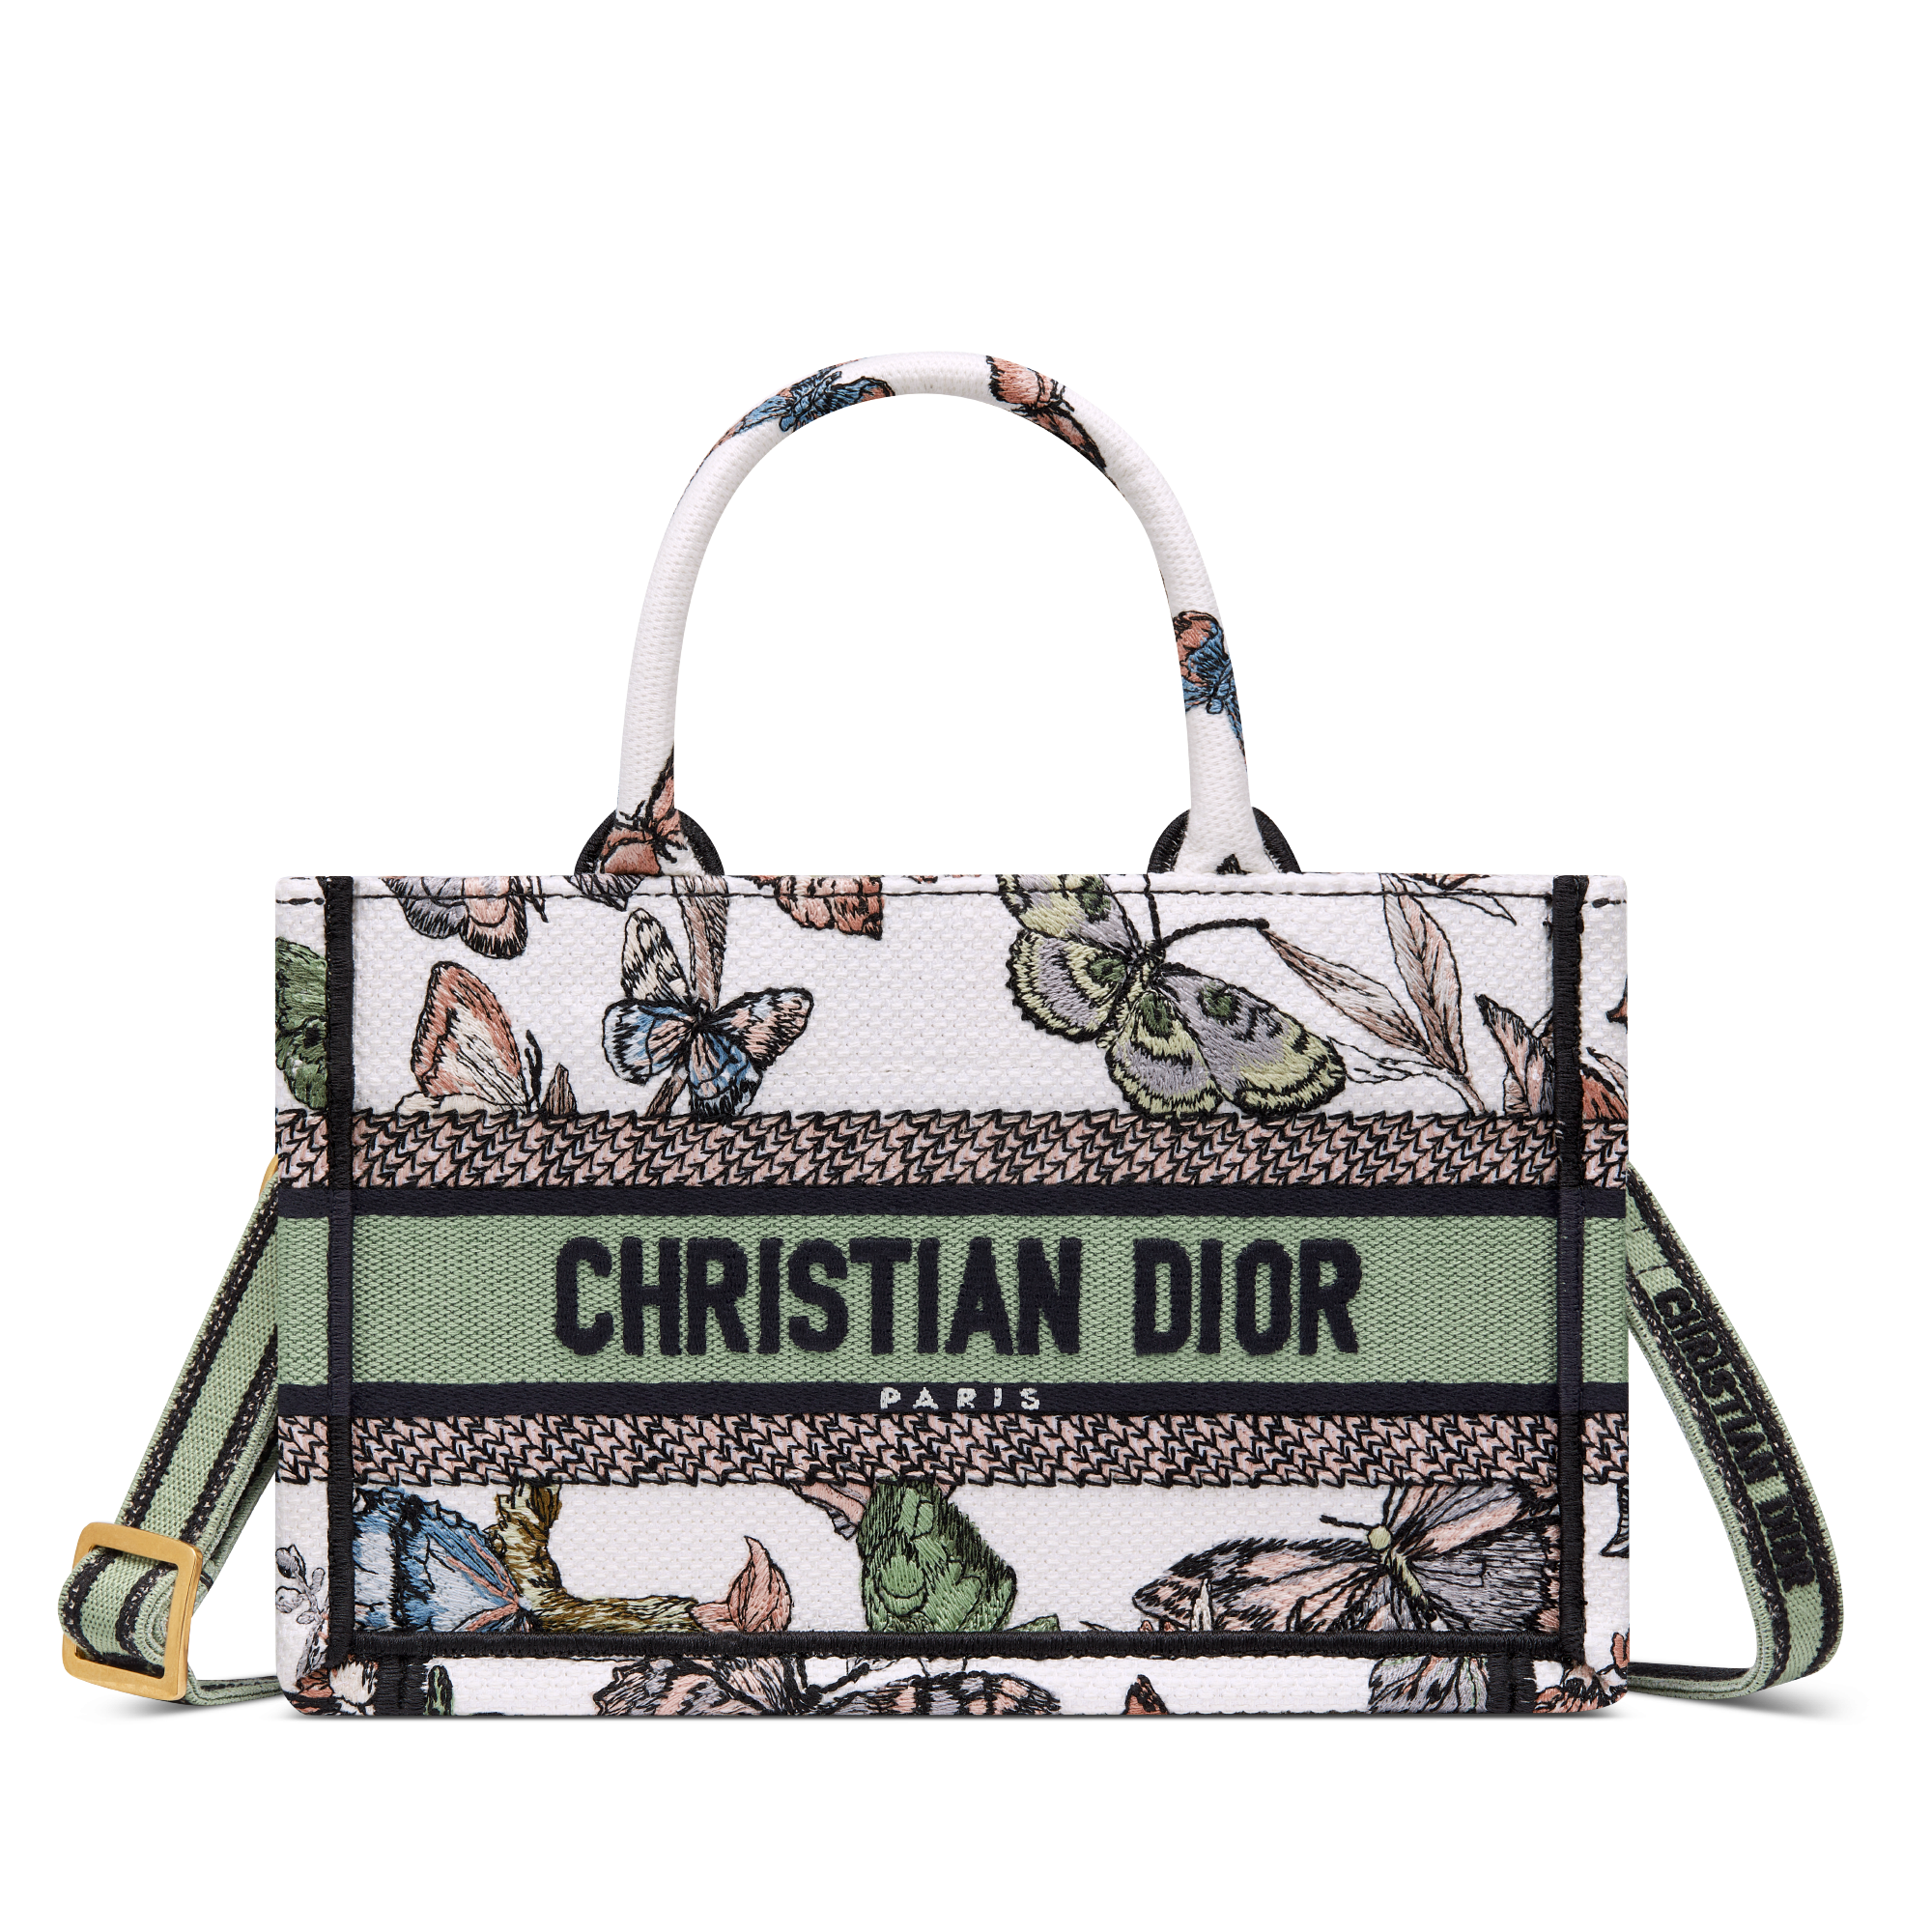 Dior presents The Dior Book Tote Bag with the Winter Garden